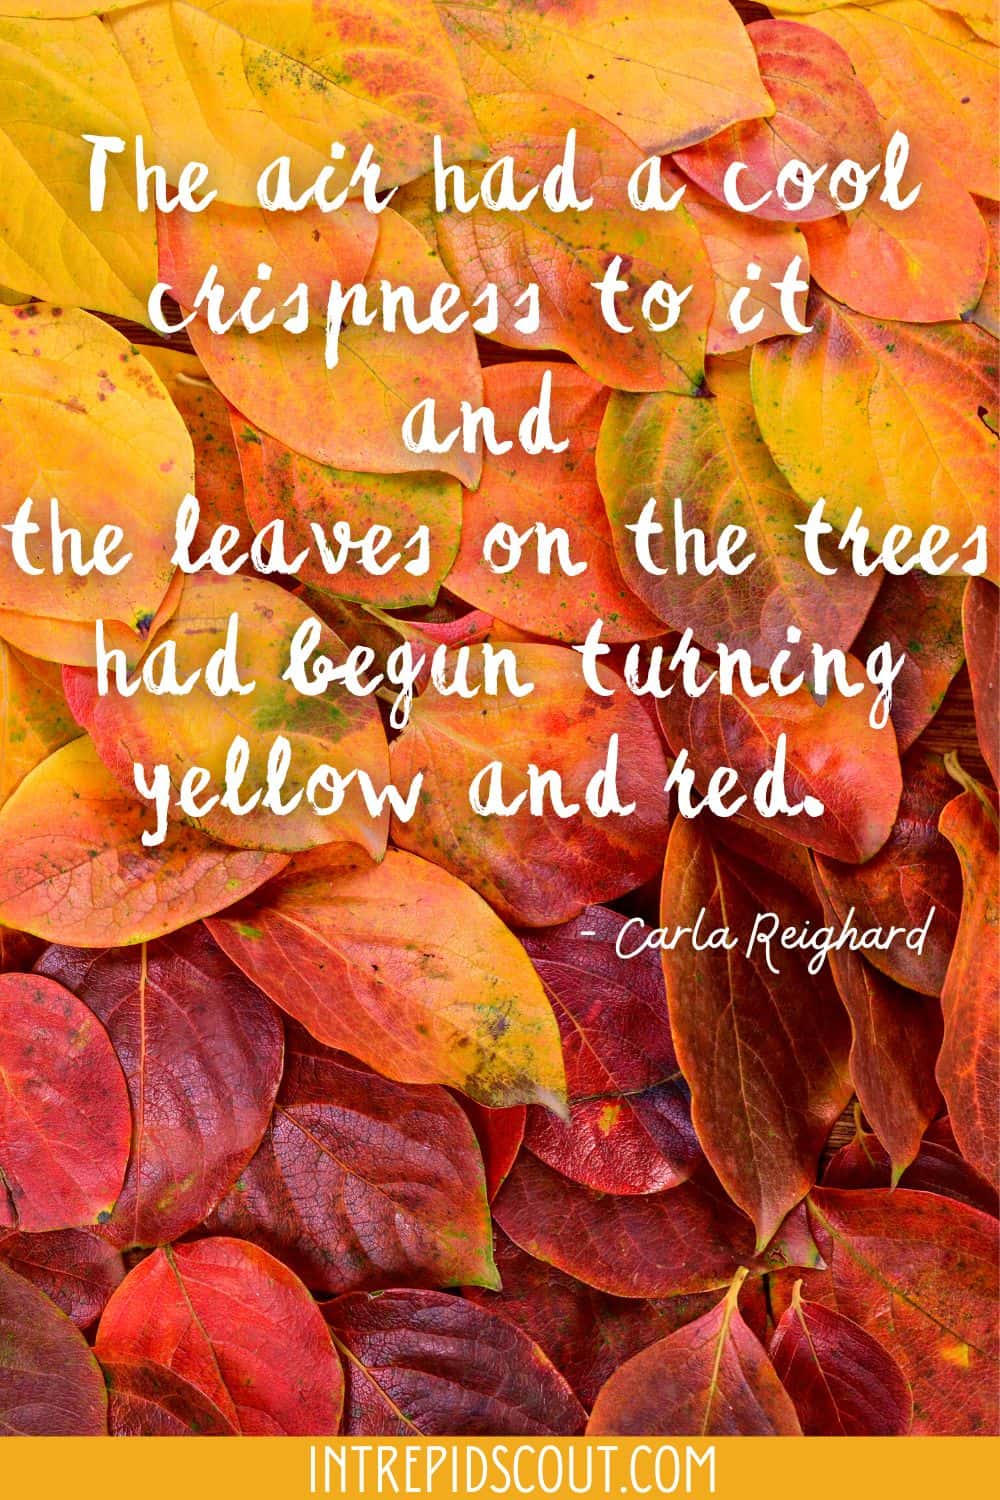 Changing Leaves Captions and Quotes